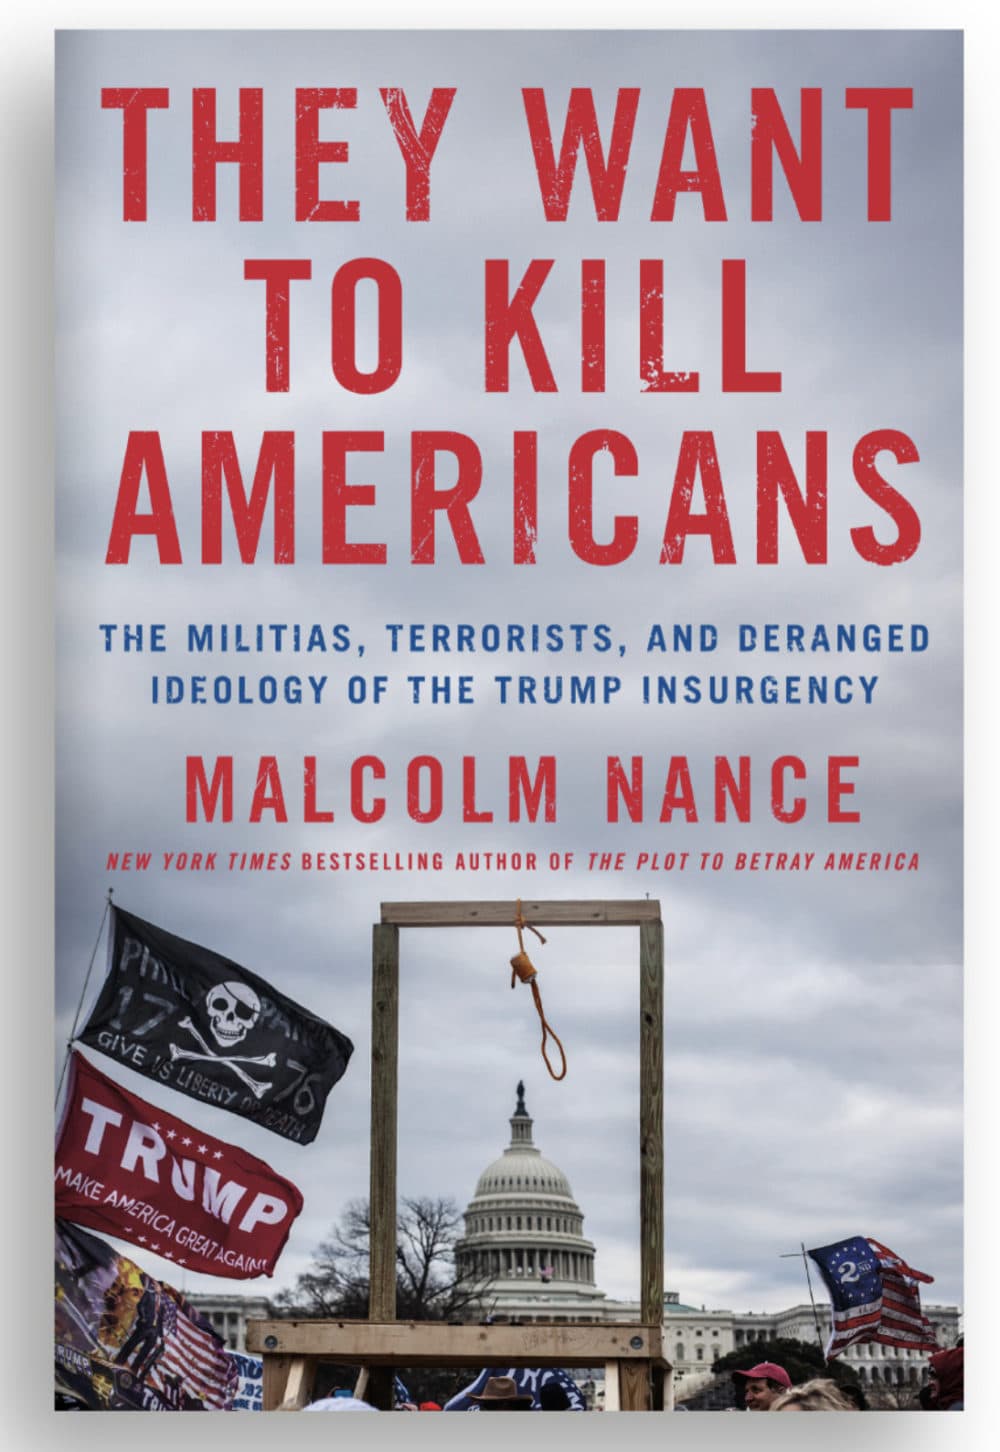 Book cover of &quot;They Want to Kill Americans: The Militias, Terrorists, and Deranged Ideology of the Trump Insurgency&quot; by Malcolm Nance. (Courtesy)